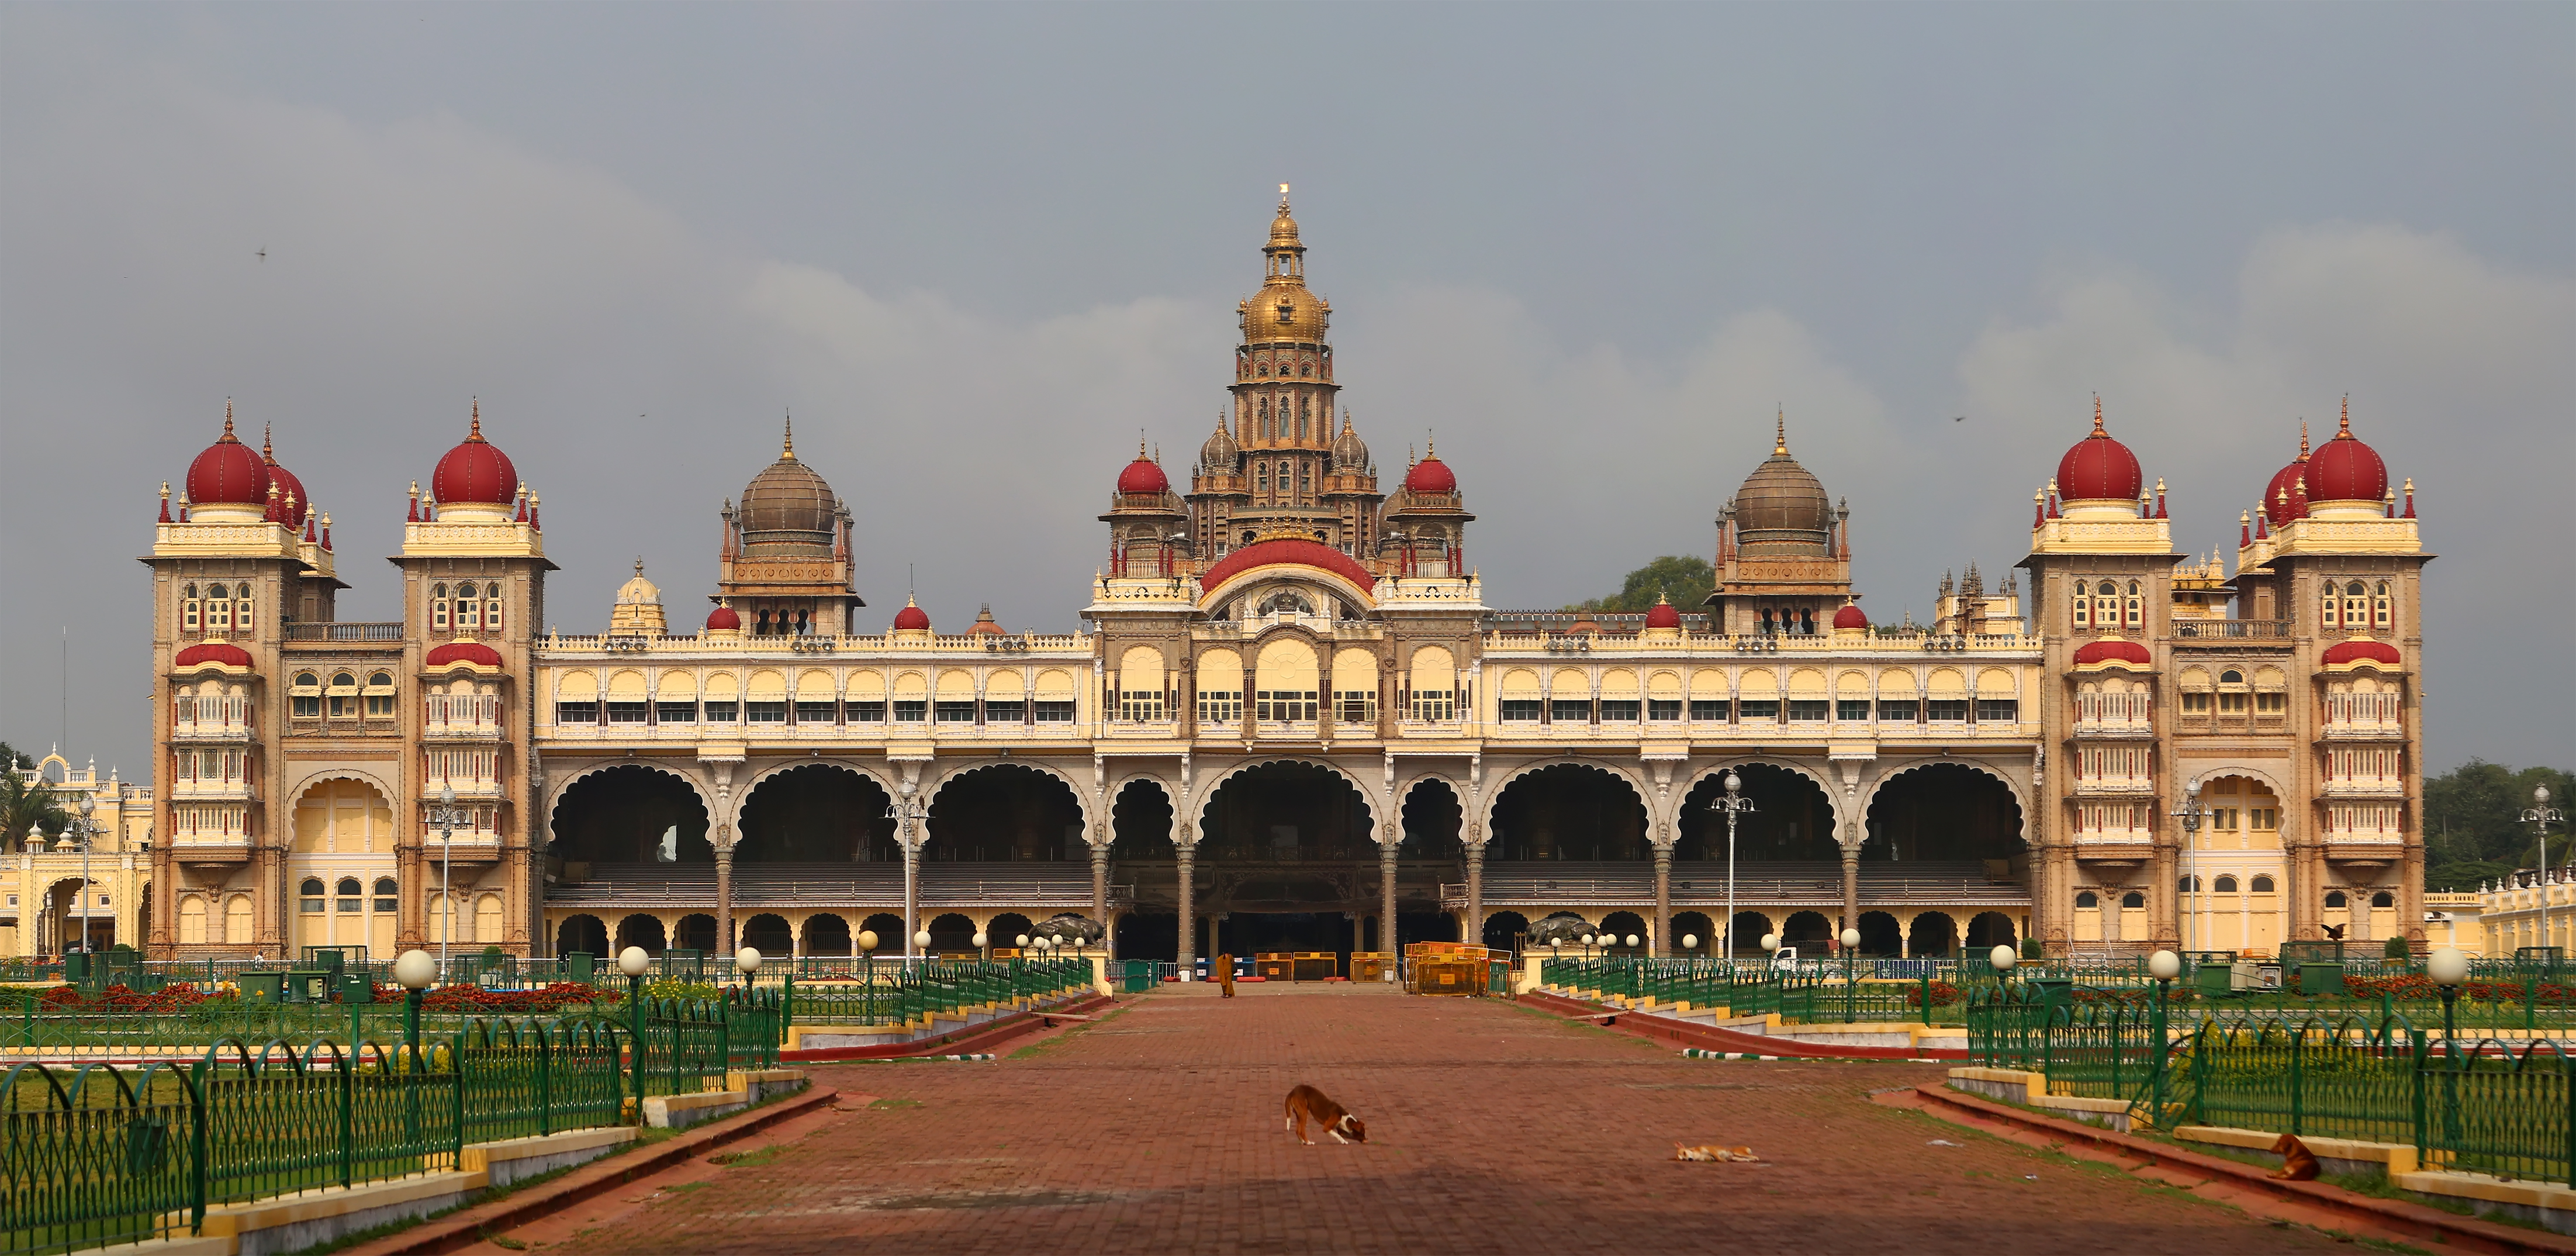 Mysore Palace - Tourist places visit in india